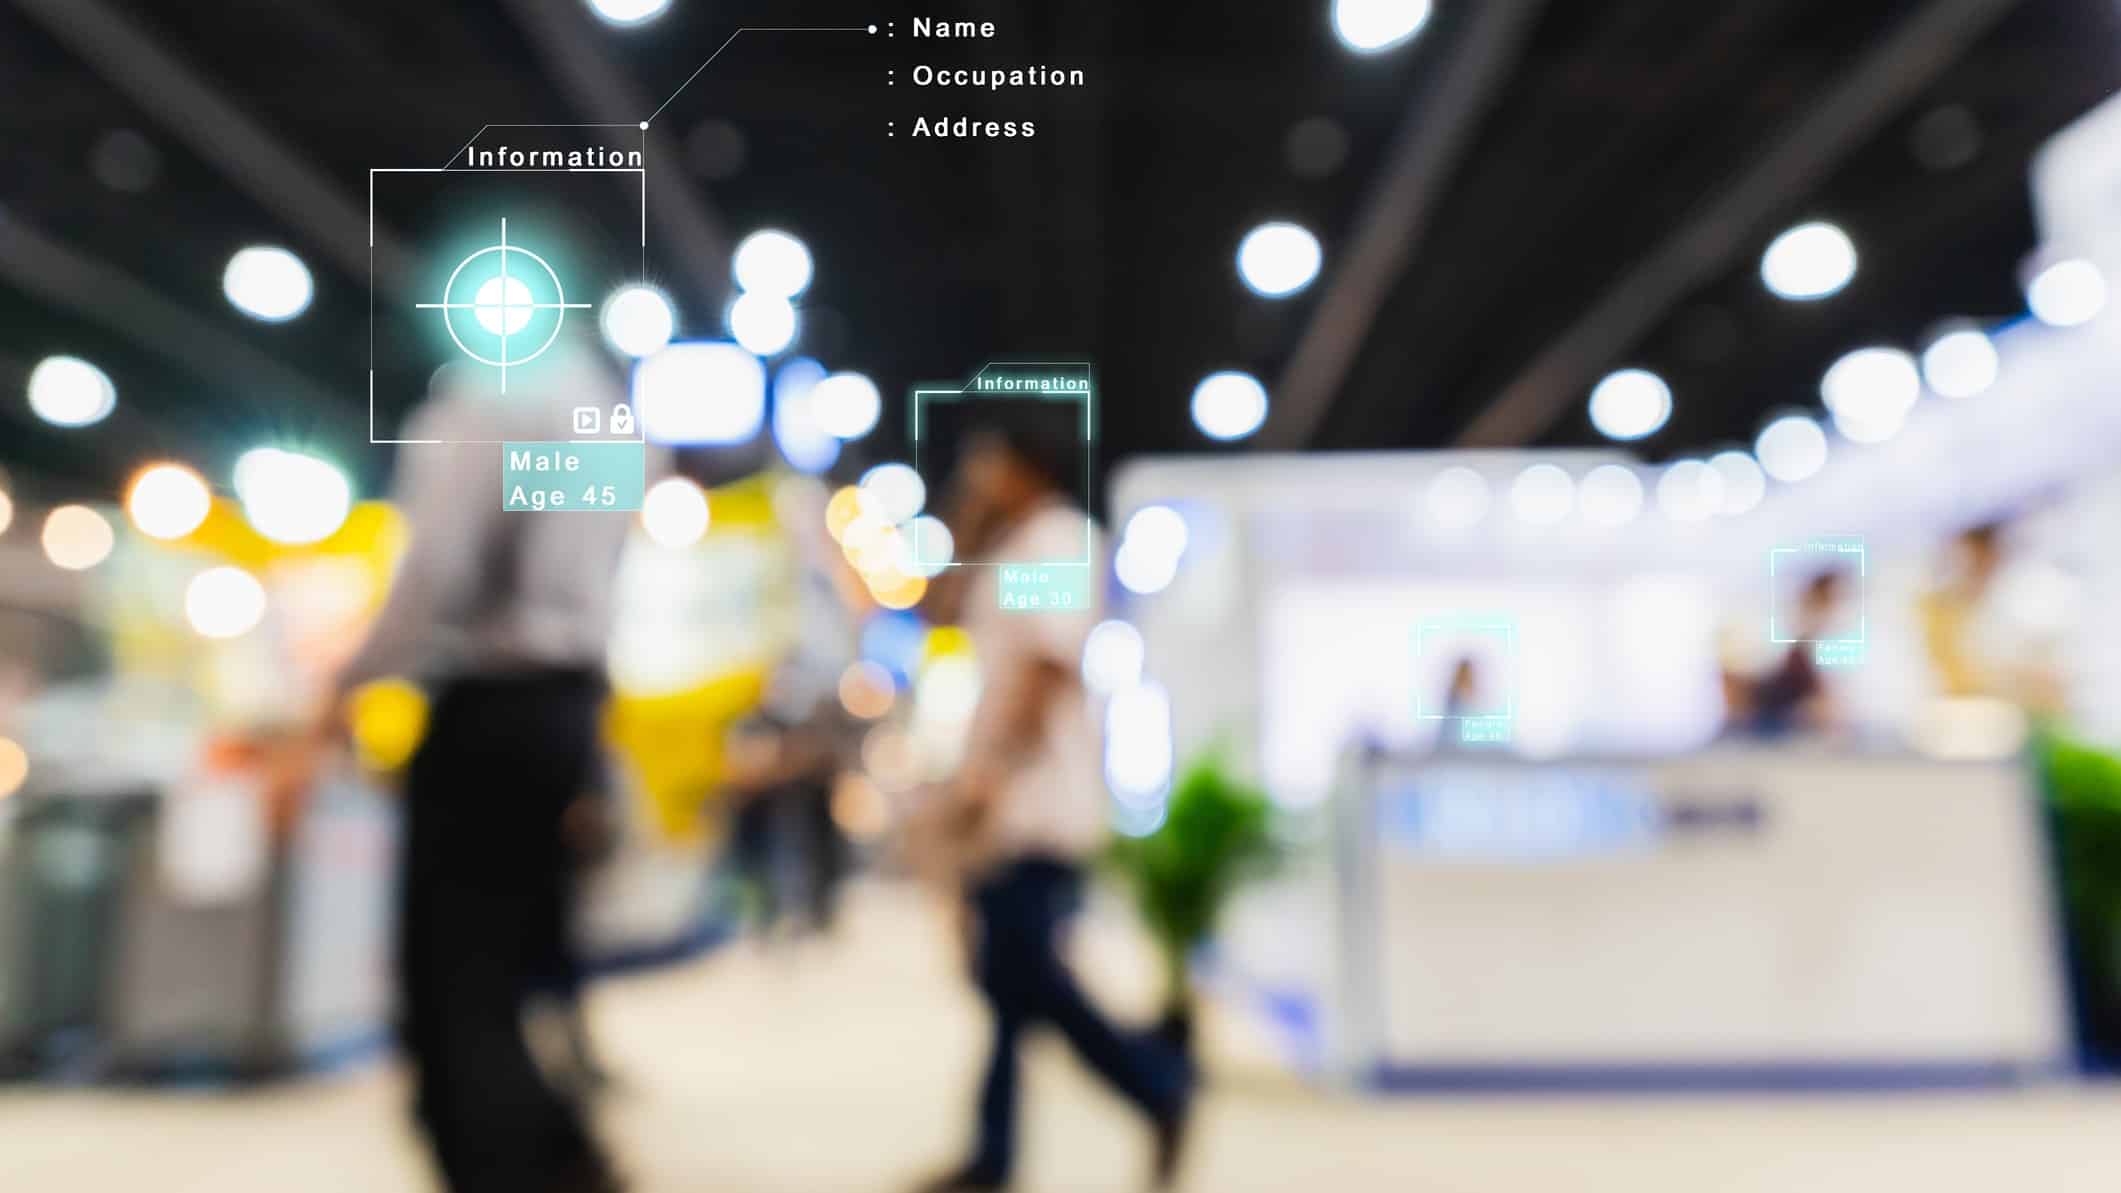 A deliberately blurred shot of shoppers inside a retail setting with facial recognition technology data superimposed on their faces, identifying their genders, ages and other biometric data.